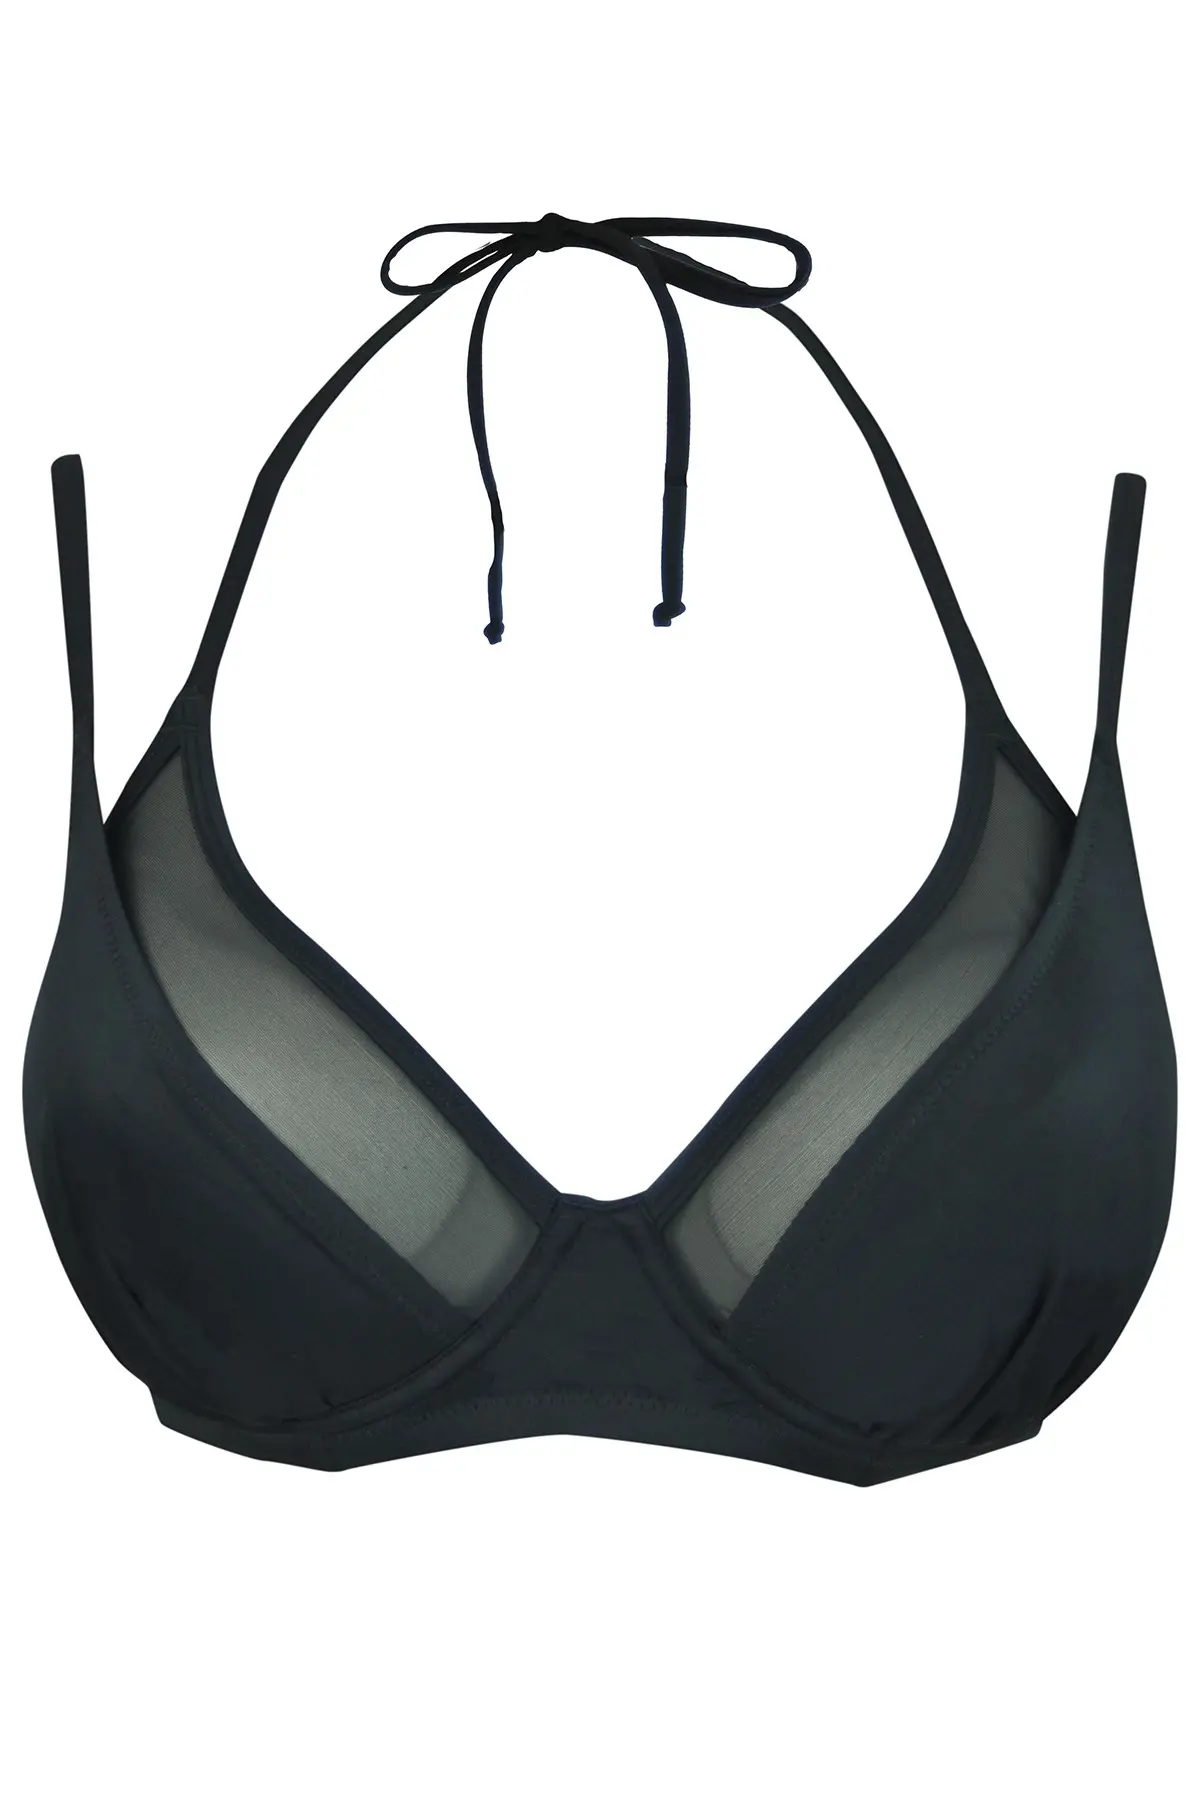 LBB Double Strap Underwired Convertible Top | Black | Pour Moi